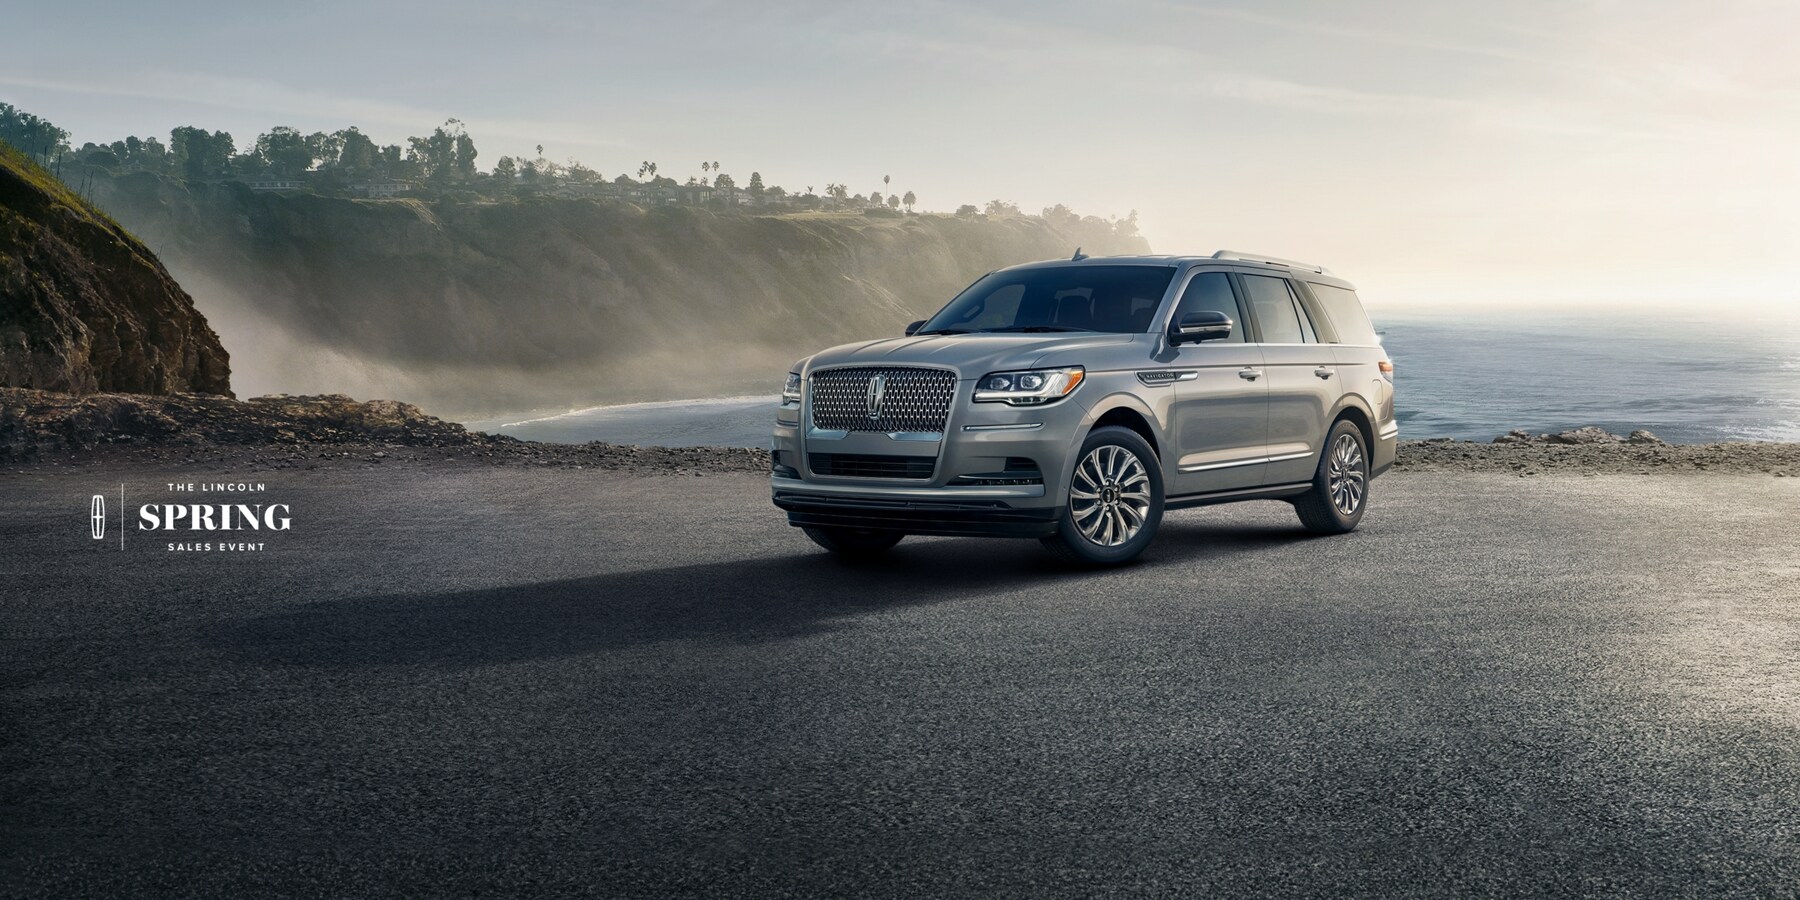 The Lincoln Spring Sales Event. A shot of the 2023 Lincoln Navigator in front of a lake.